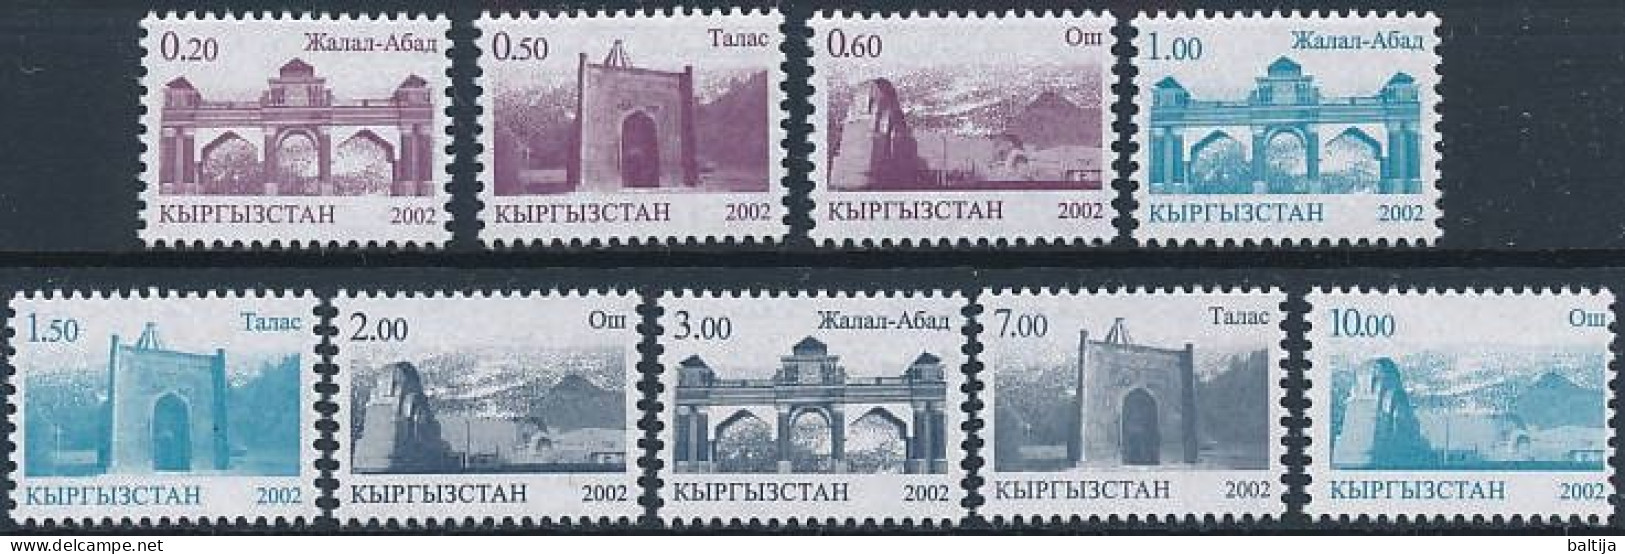 Mi 305-313 ** MNH / Definitives, Sightseeing Attractions, Architecture - Kyrgyzstan